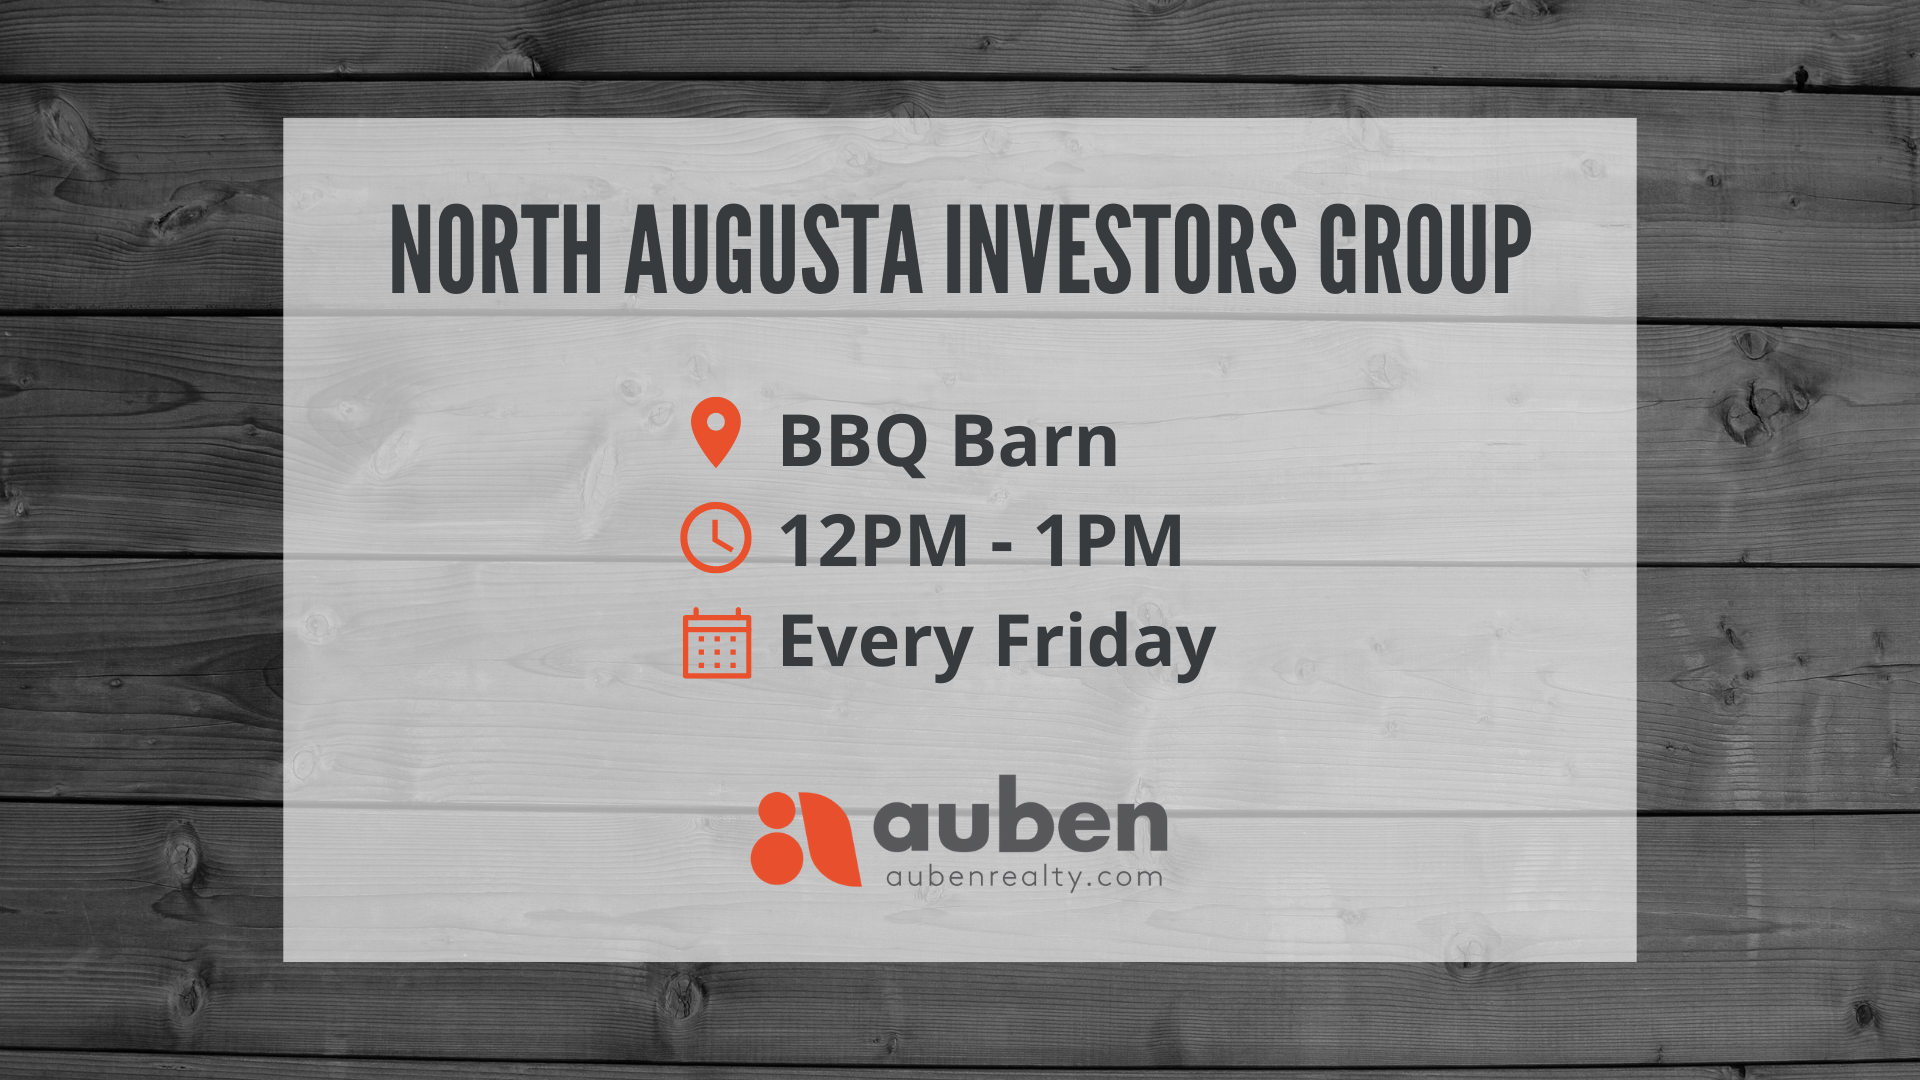 North Augusta Investors Lunch is an opportunity to exchange and receive investing advice over a casual meal!